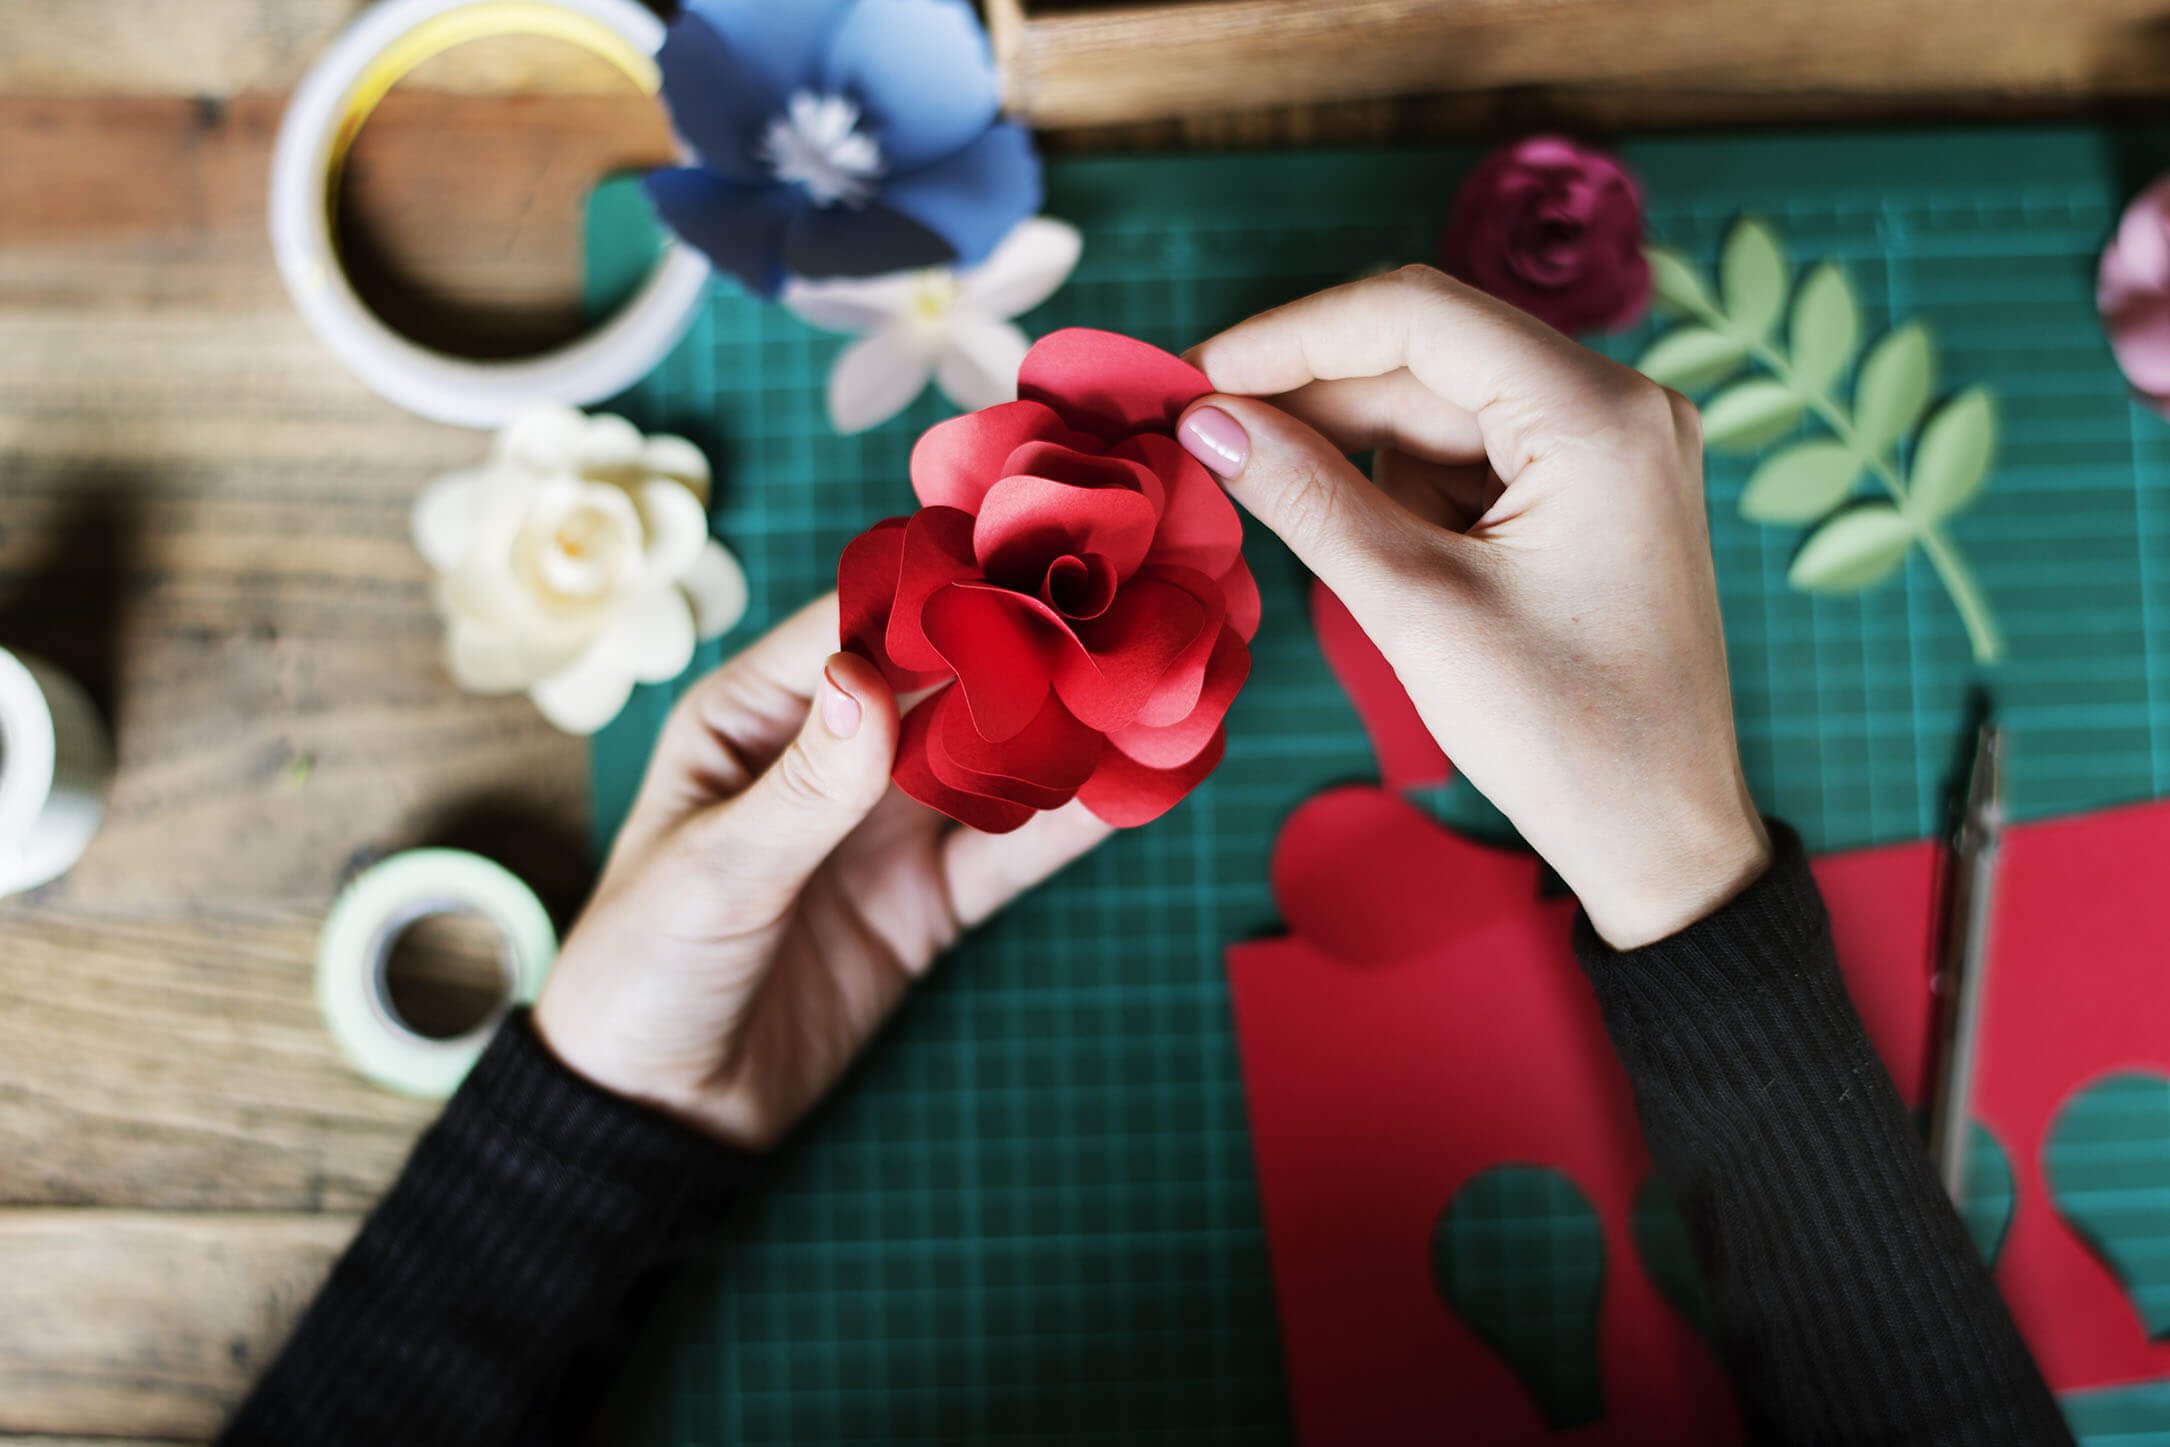 Crafting a red flower